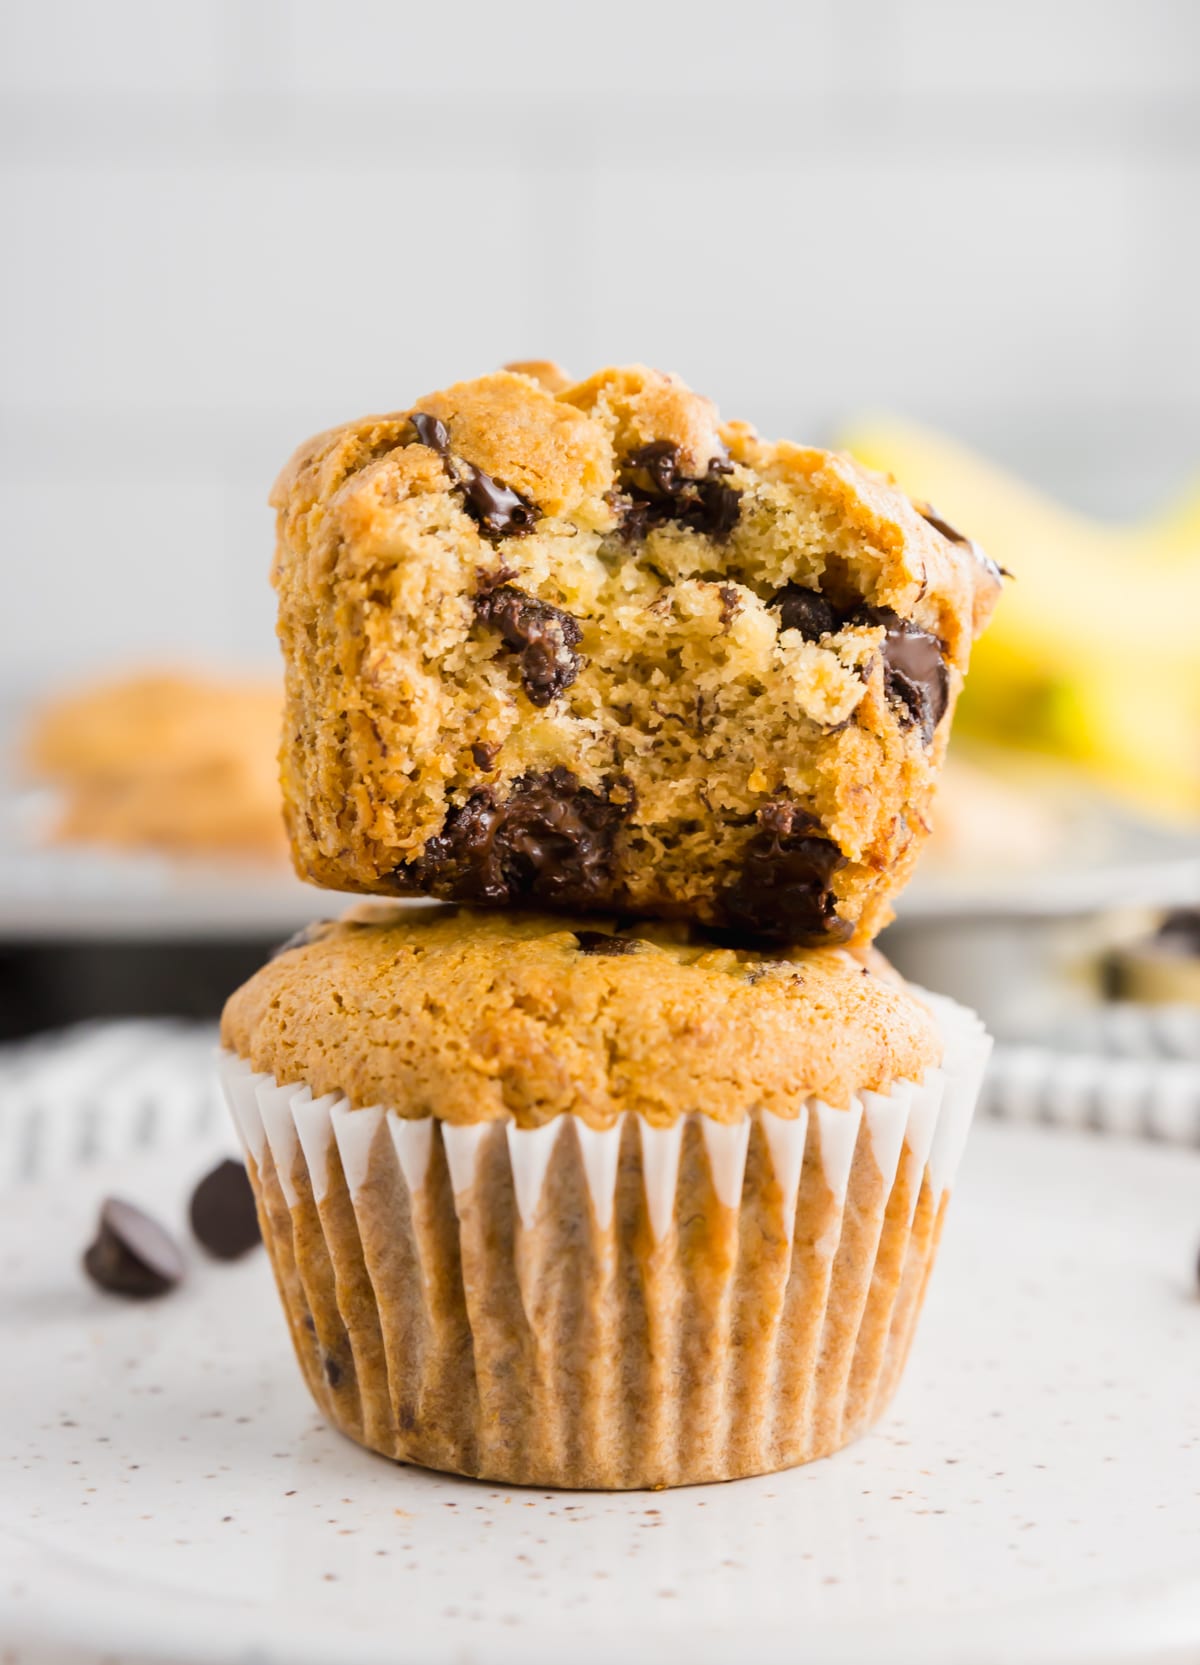 A stack of two banana chocolate chip muffins with the top one cut in half.